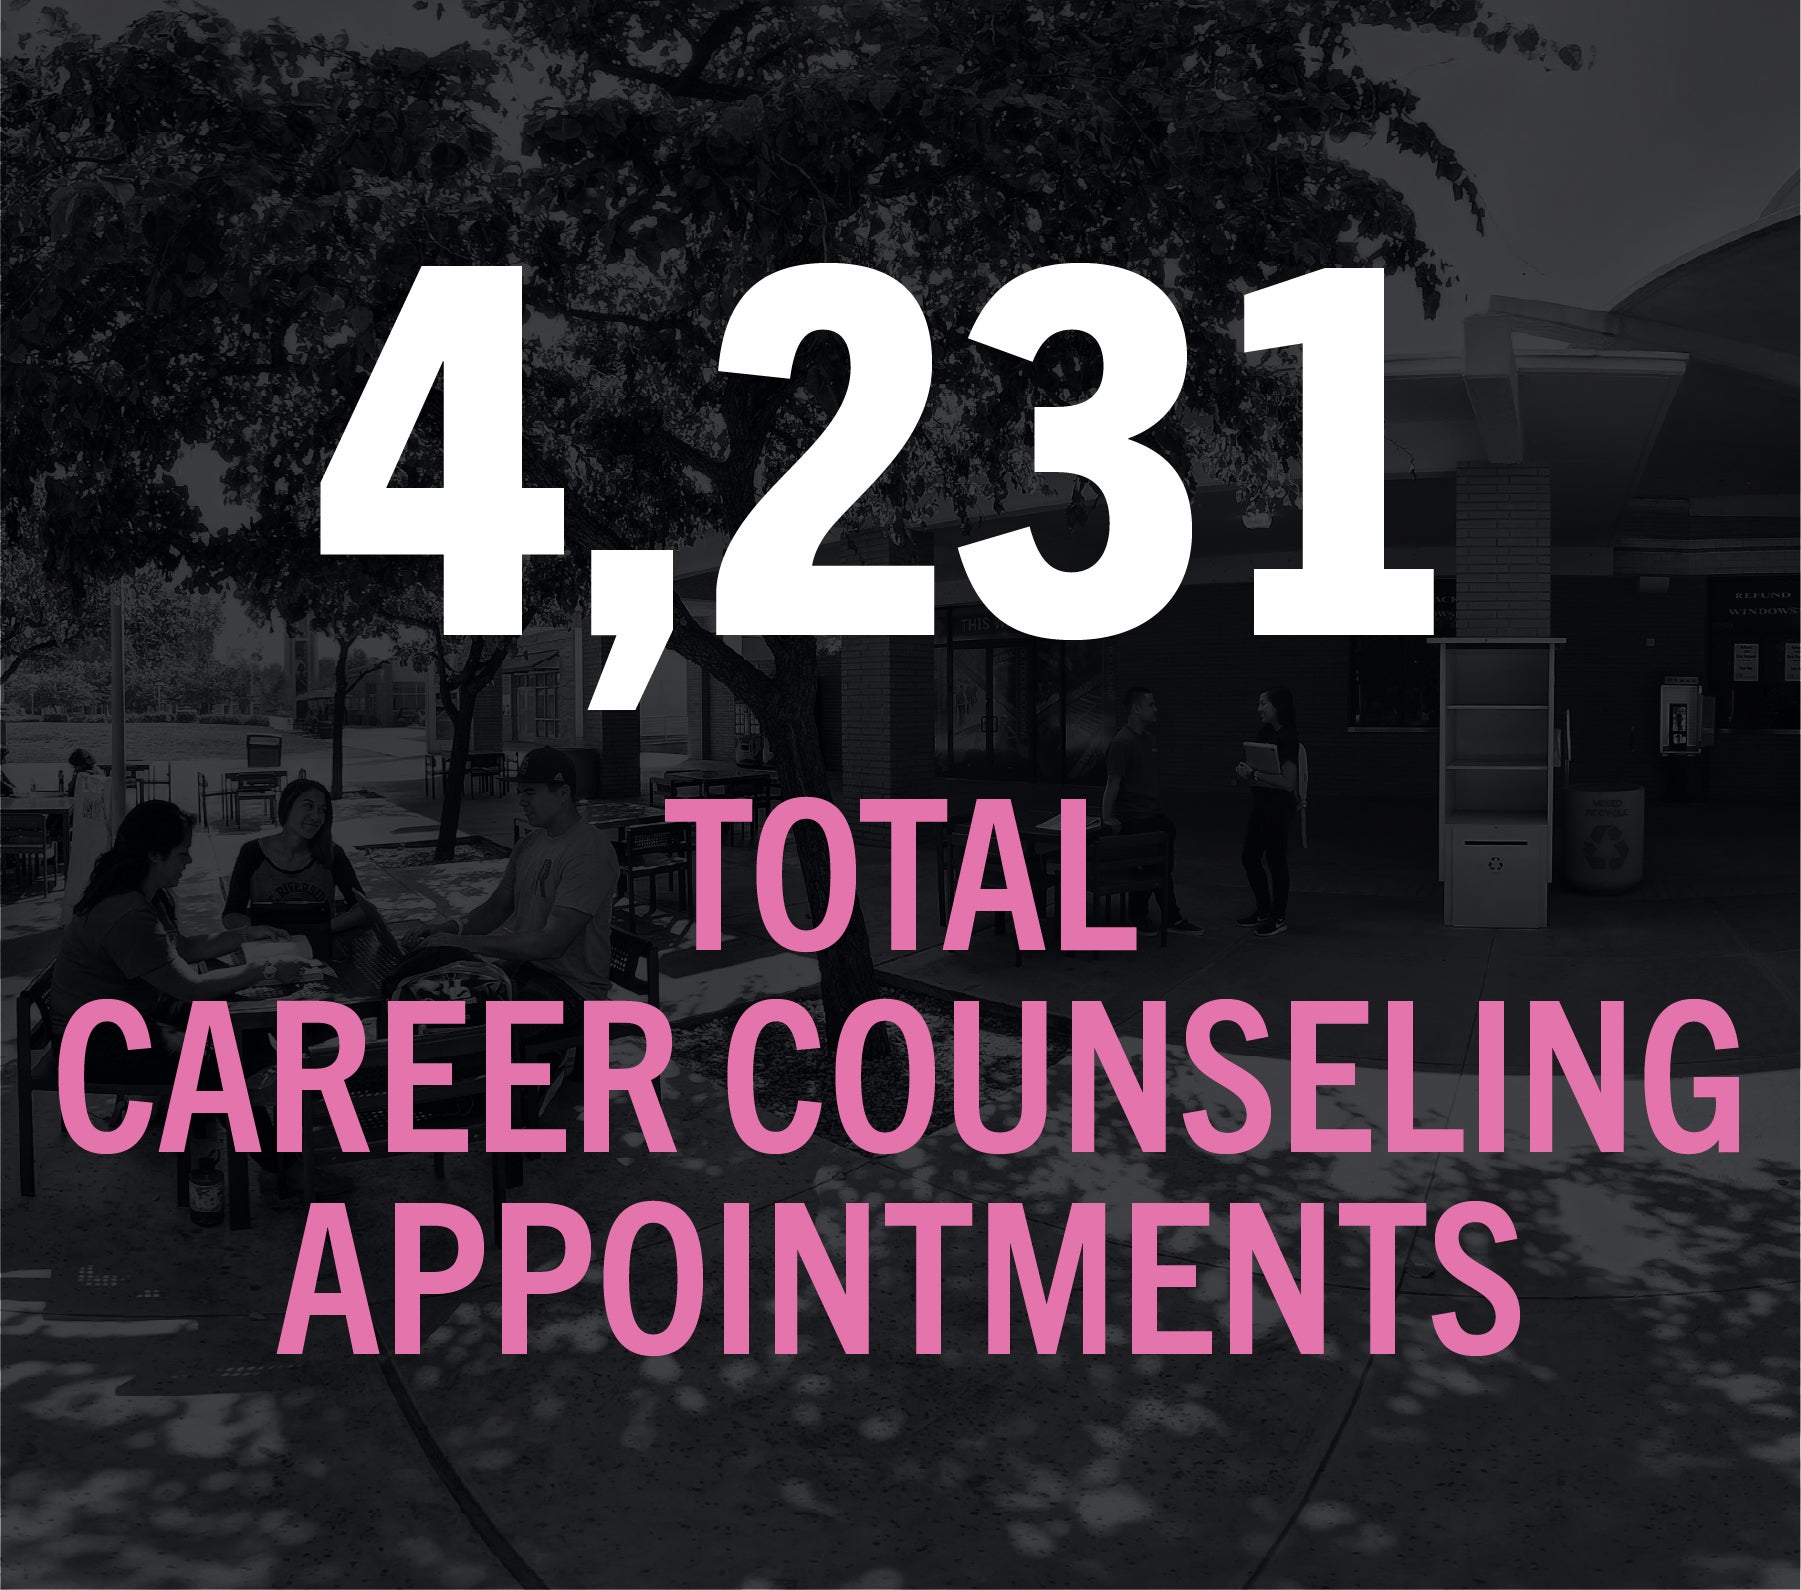 Total Career Counseling Appointments